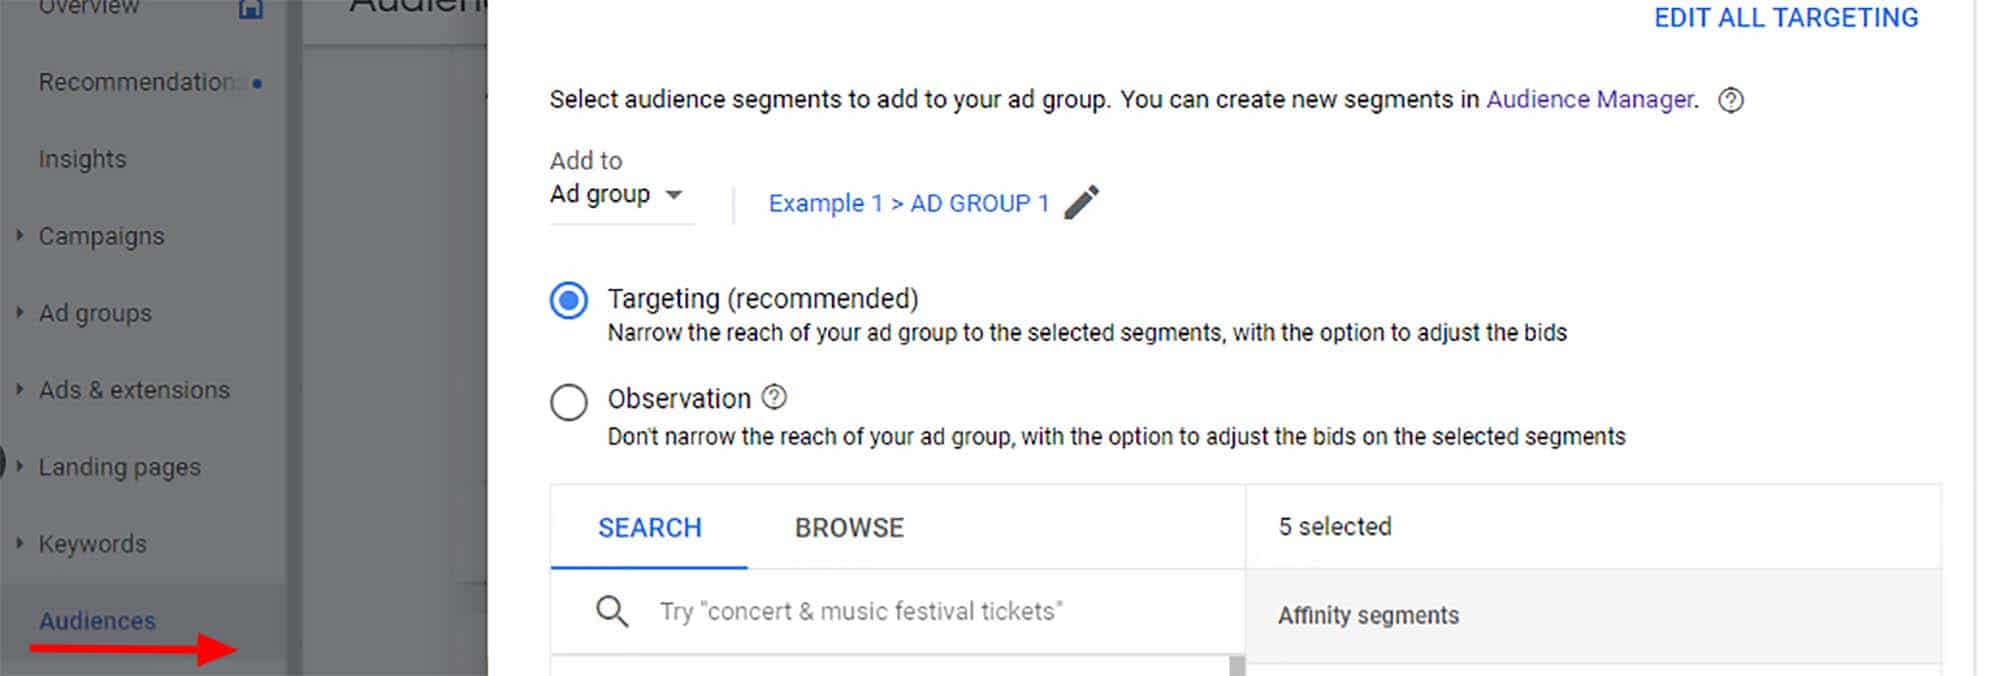 PPC audience strategy: Targeting vs Observation by Search Engine Journal